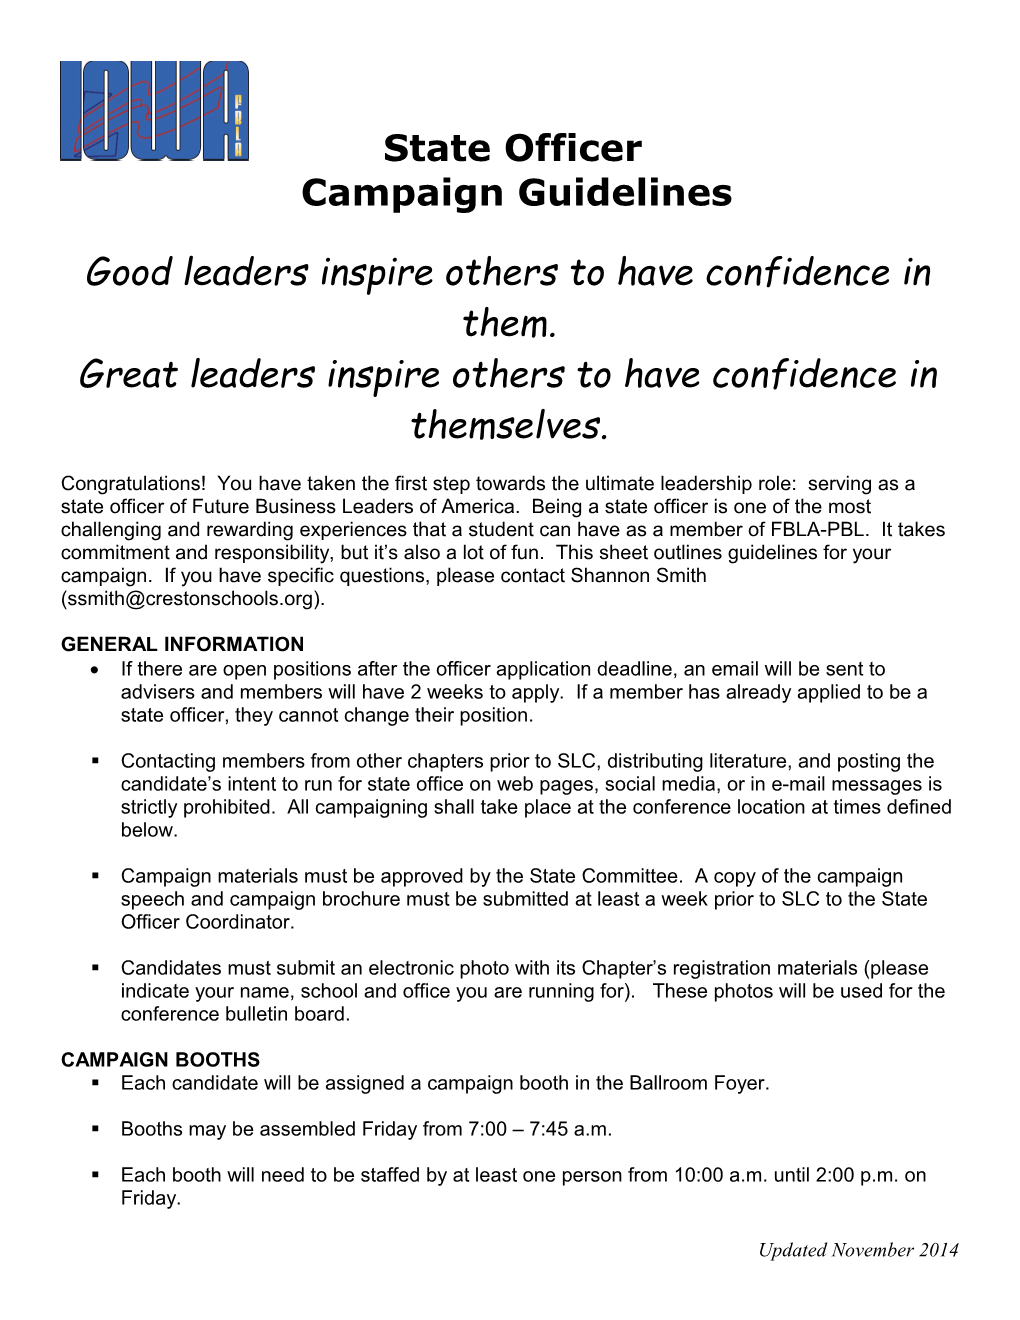 Good Leaders Inspire Others to Have Confidence in Them